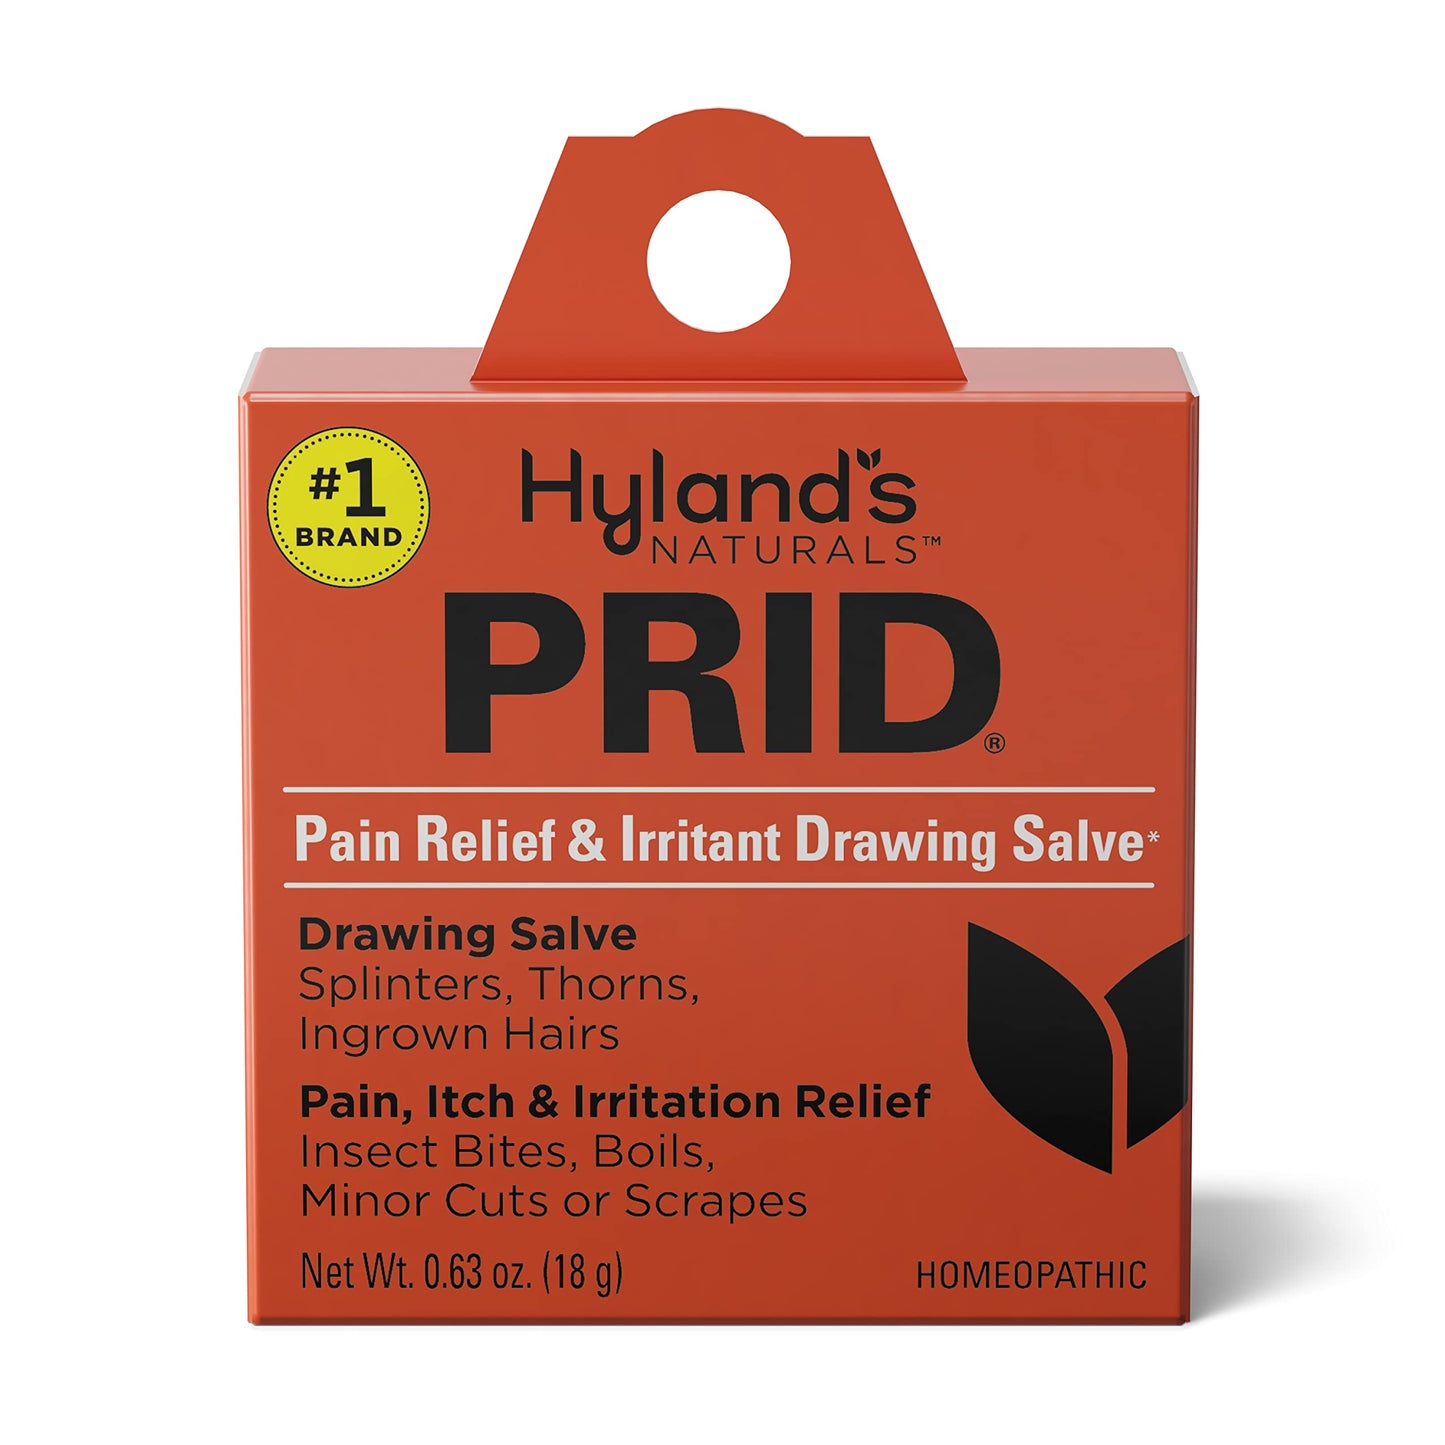 Hyland's Naturals PRID Drawing Salve, Topical Skin Irritation Relief, For Splinters, Thorns, Ingrown Hairs, Itch Relief for Bug Bites, Boils, Minor Cuts & Scrapes, 18 Grams